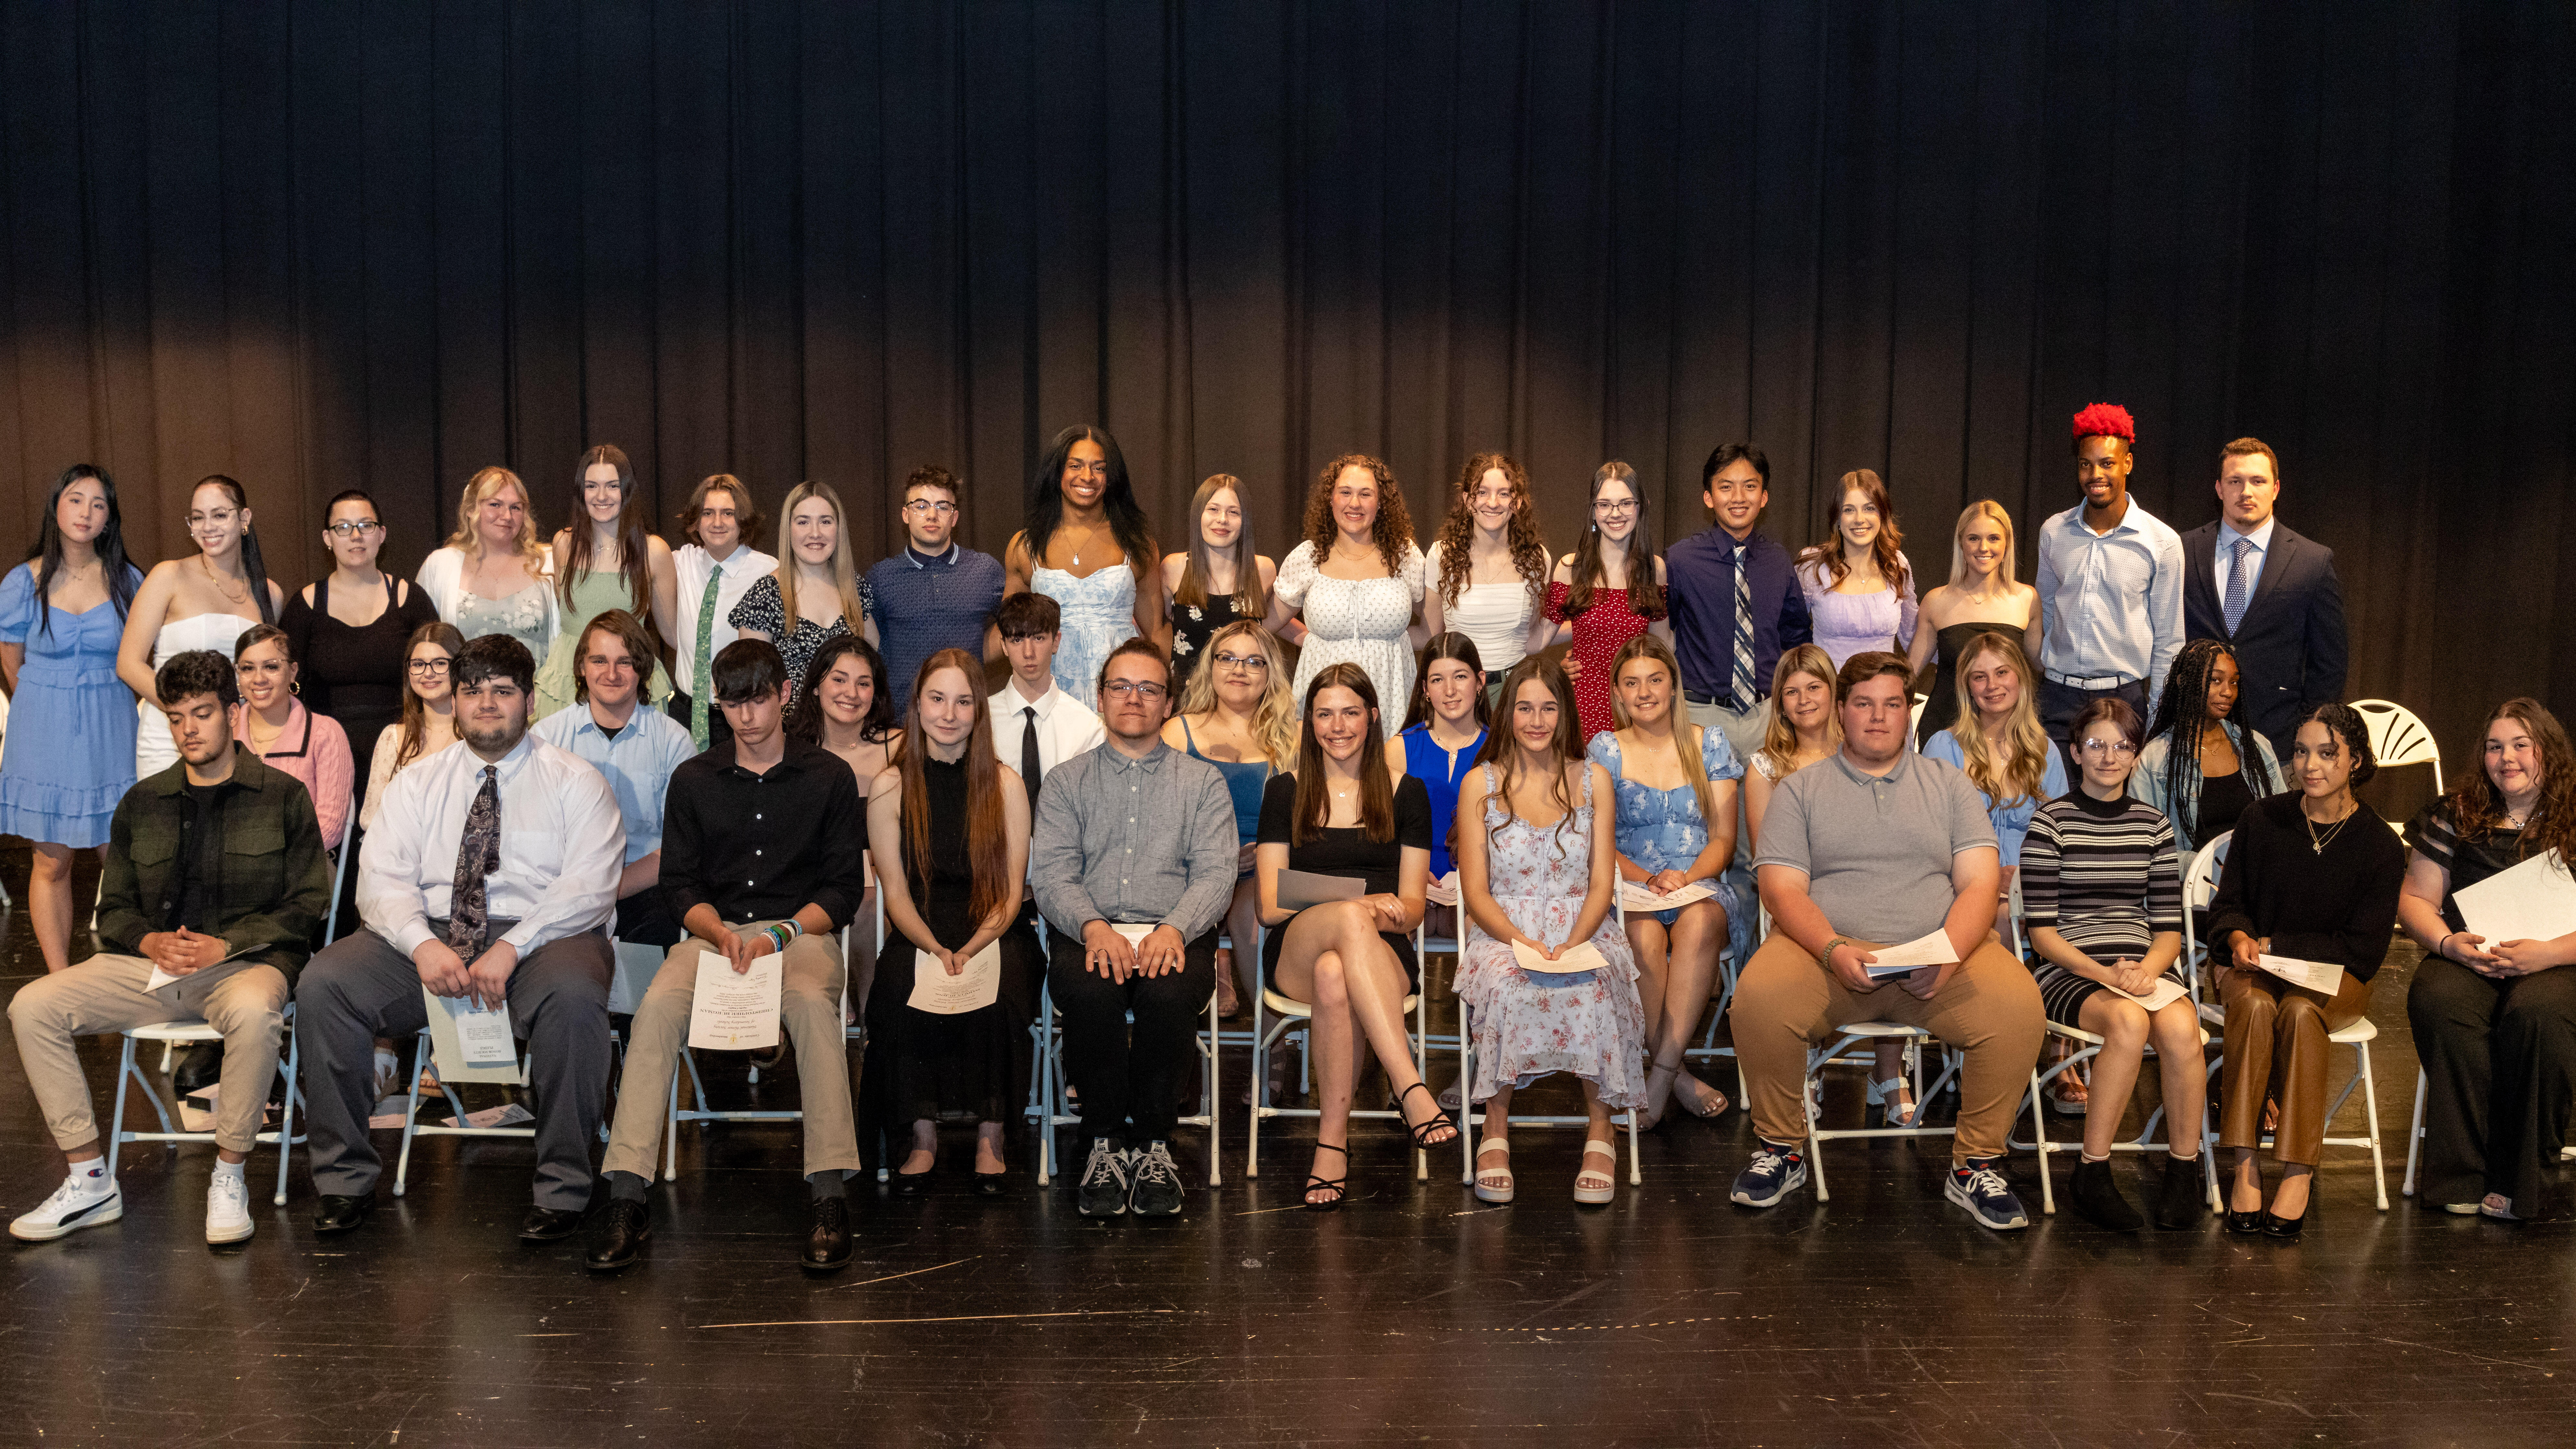 The Steel Valley National Honor Society